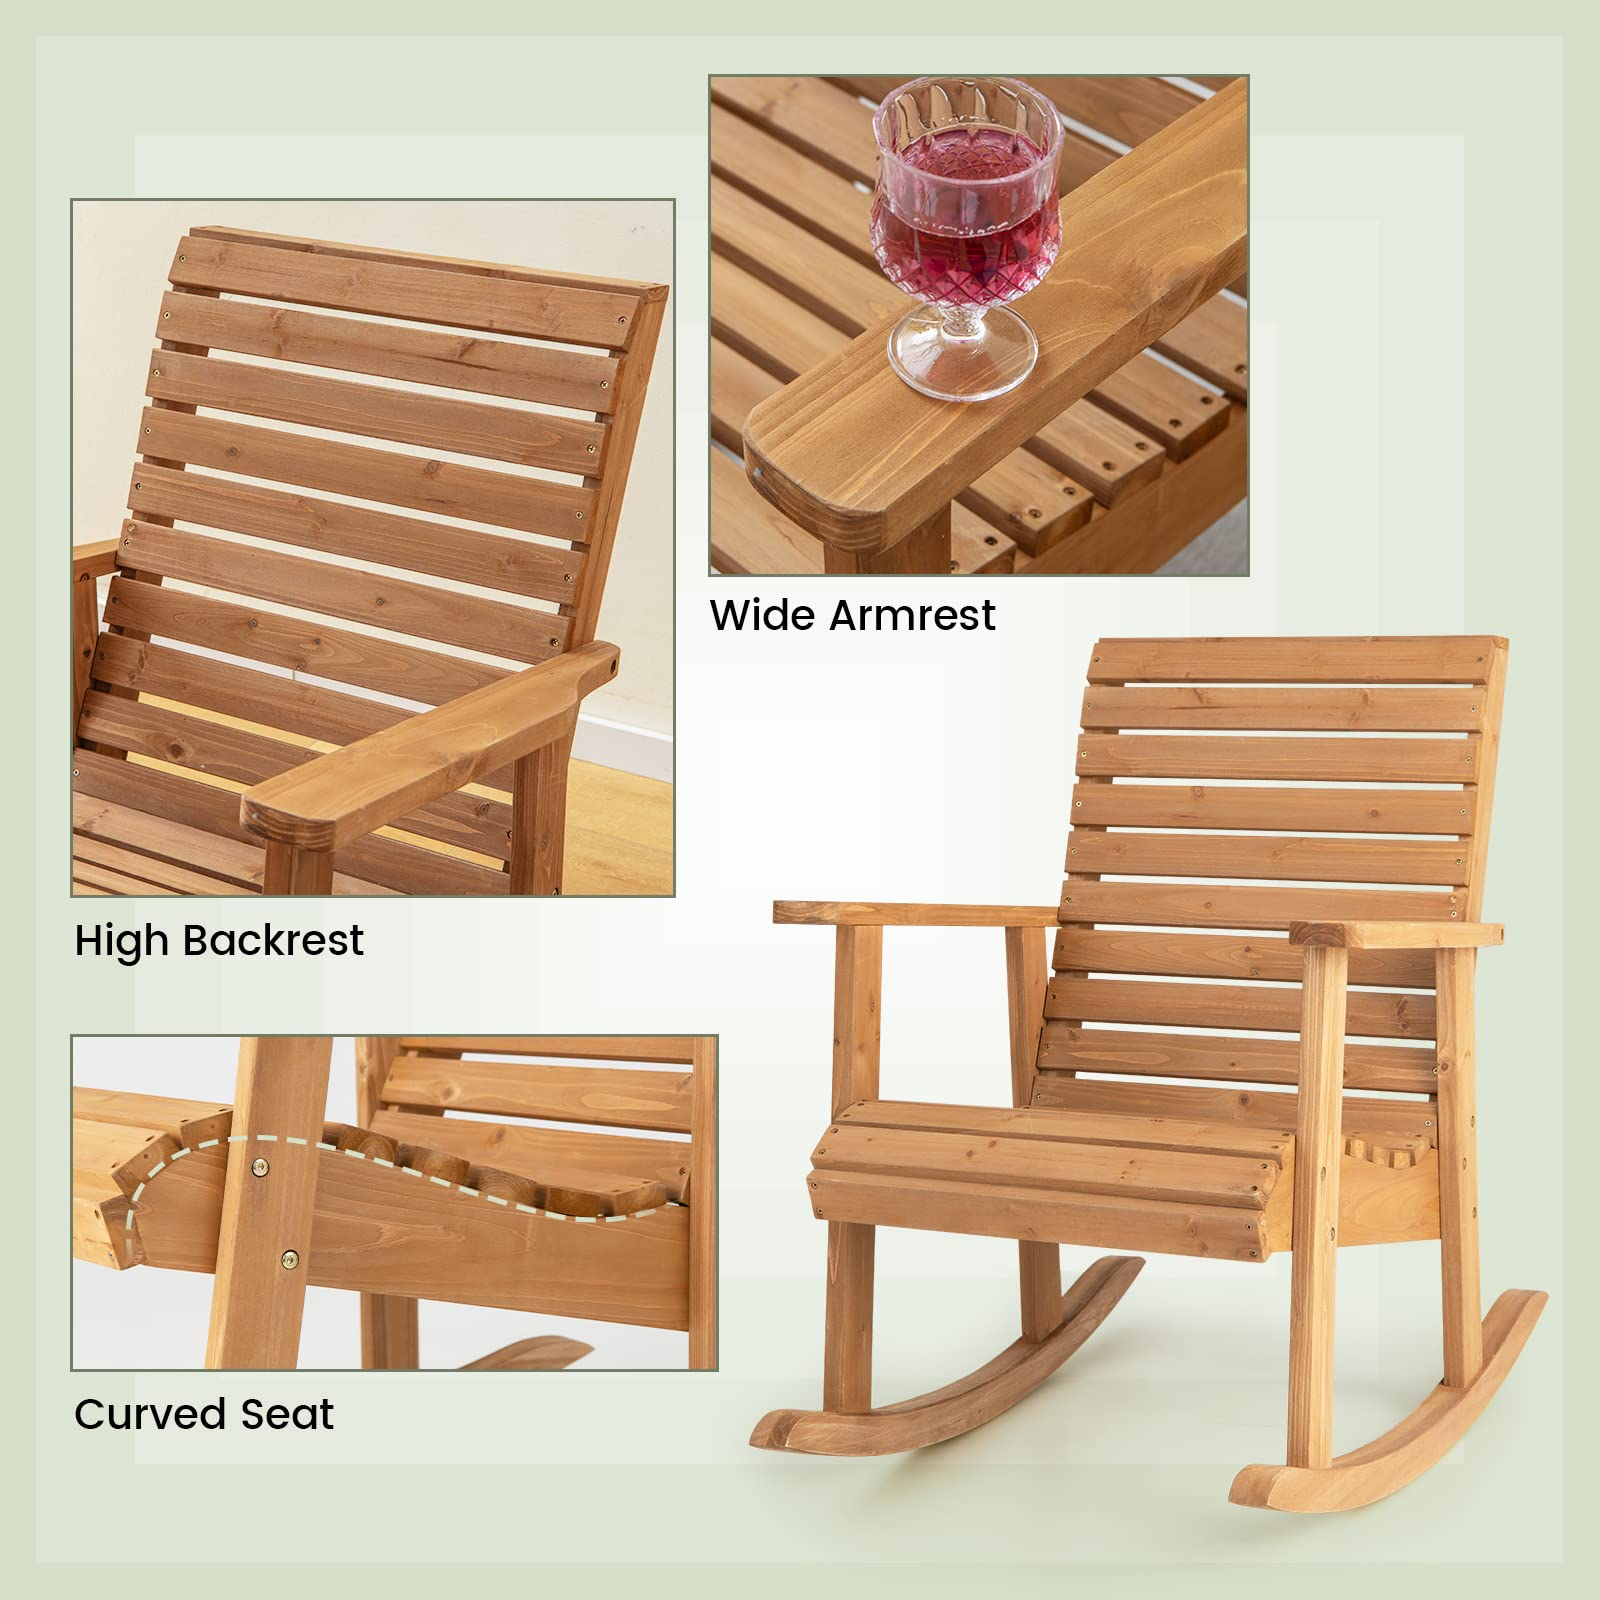 Giantex Wood Rocking Chair Outdoor - Outside Rocker with High Backrest